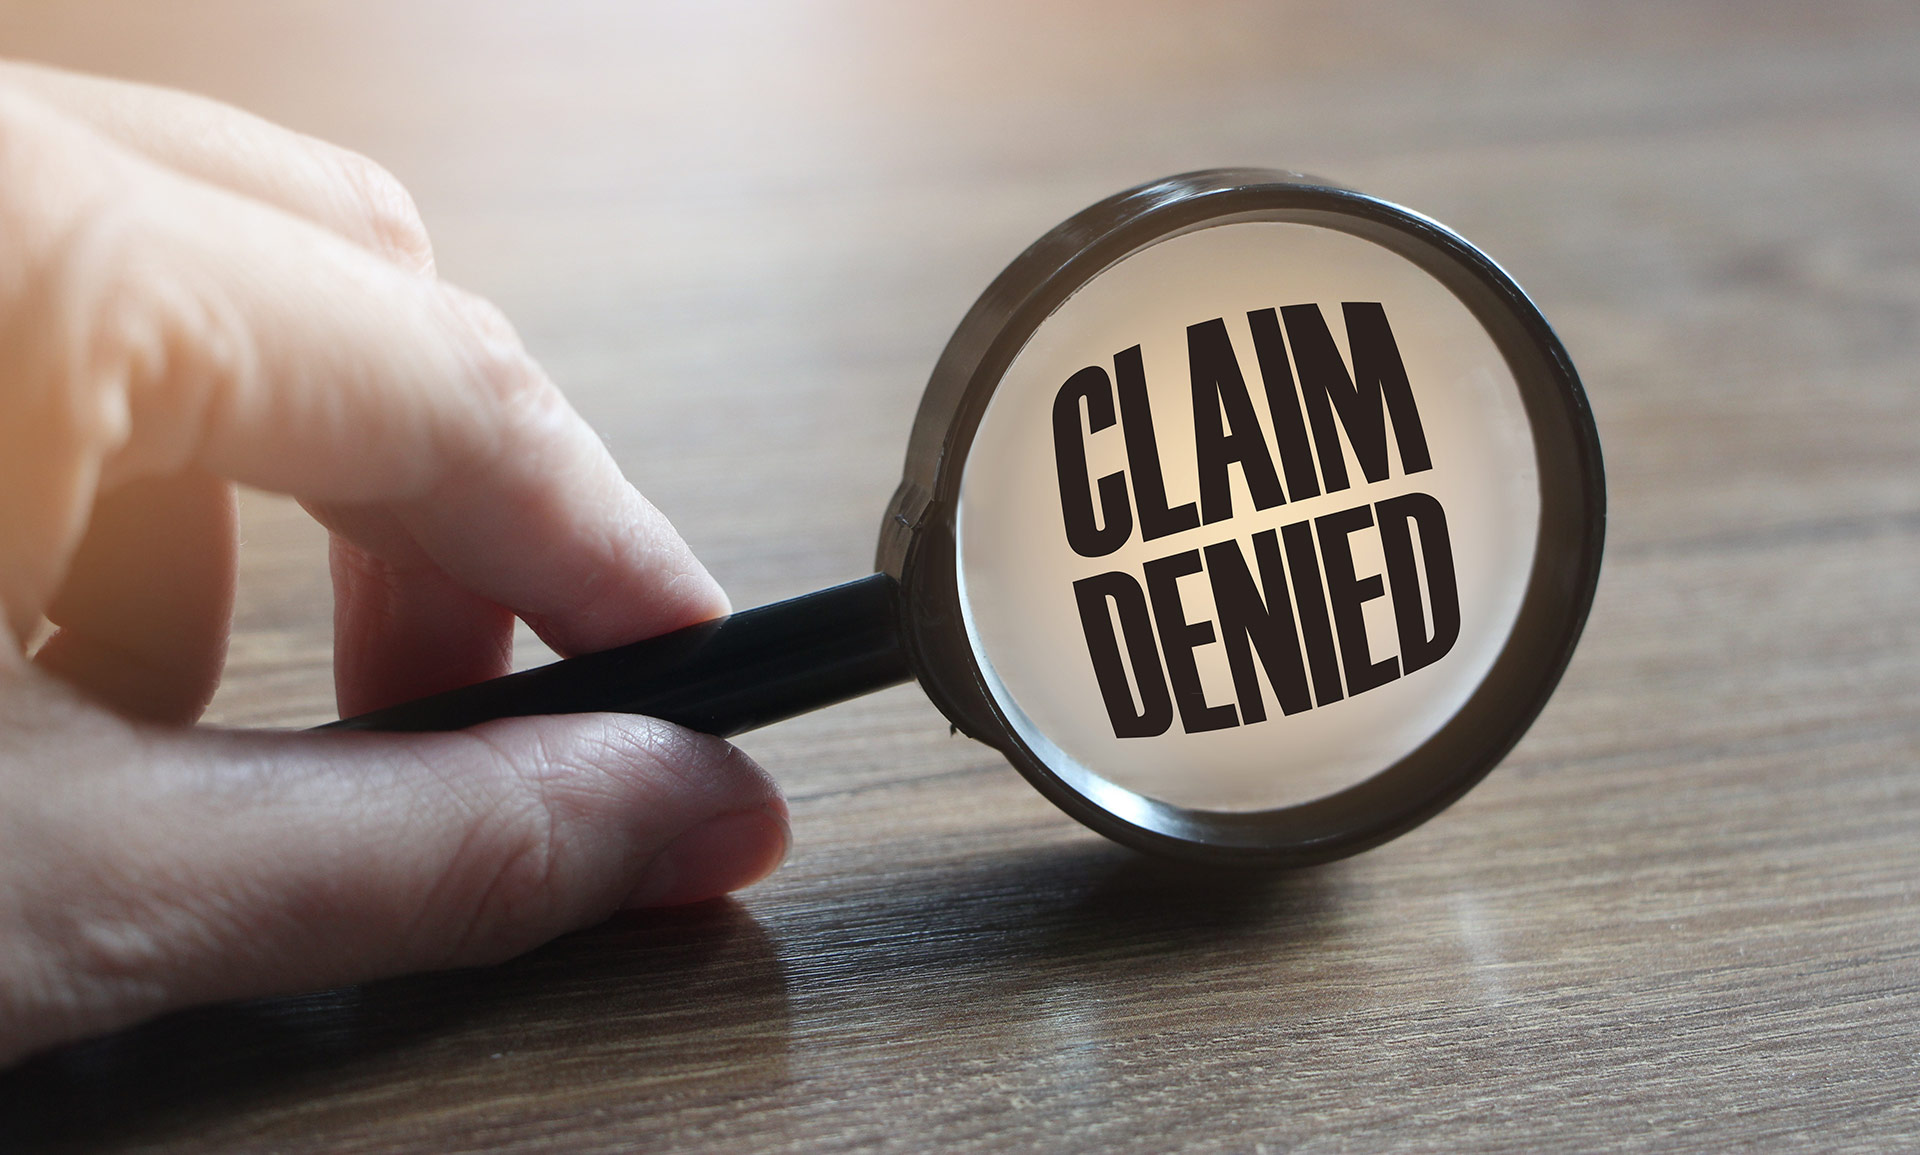 Hand holding a magnifying glass over text that says "Claim Denied"